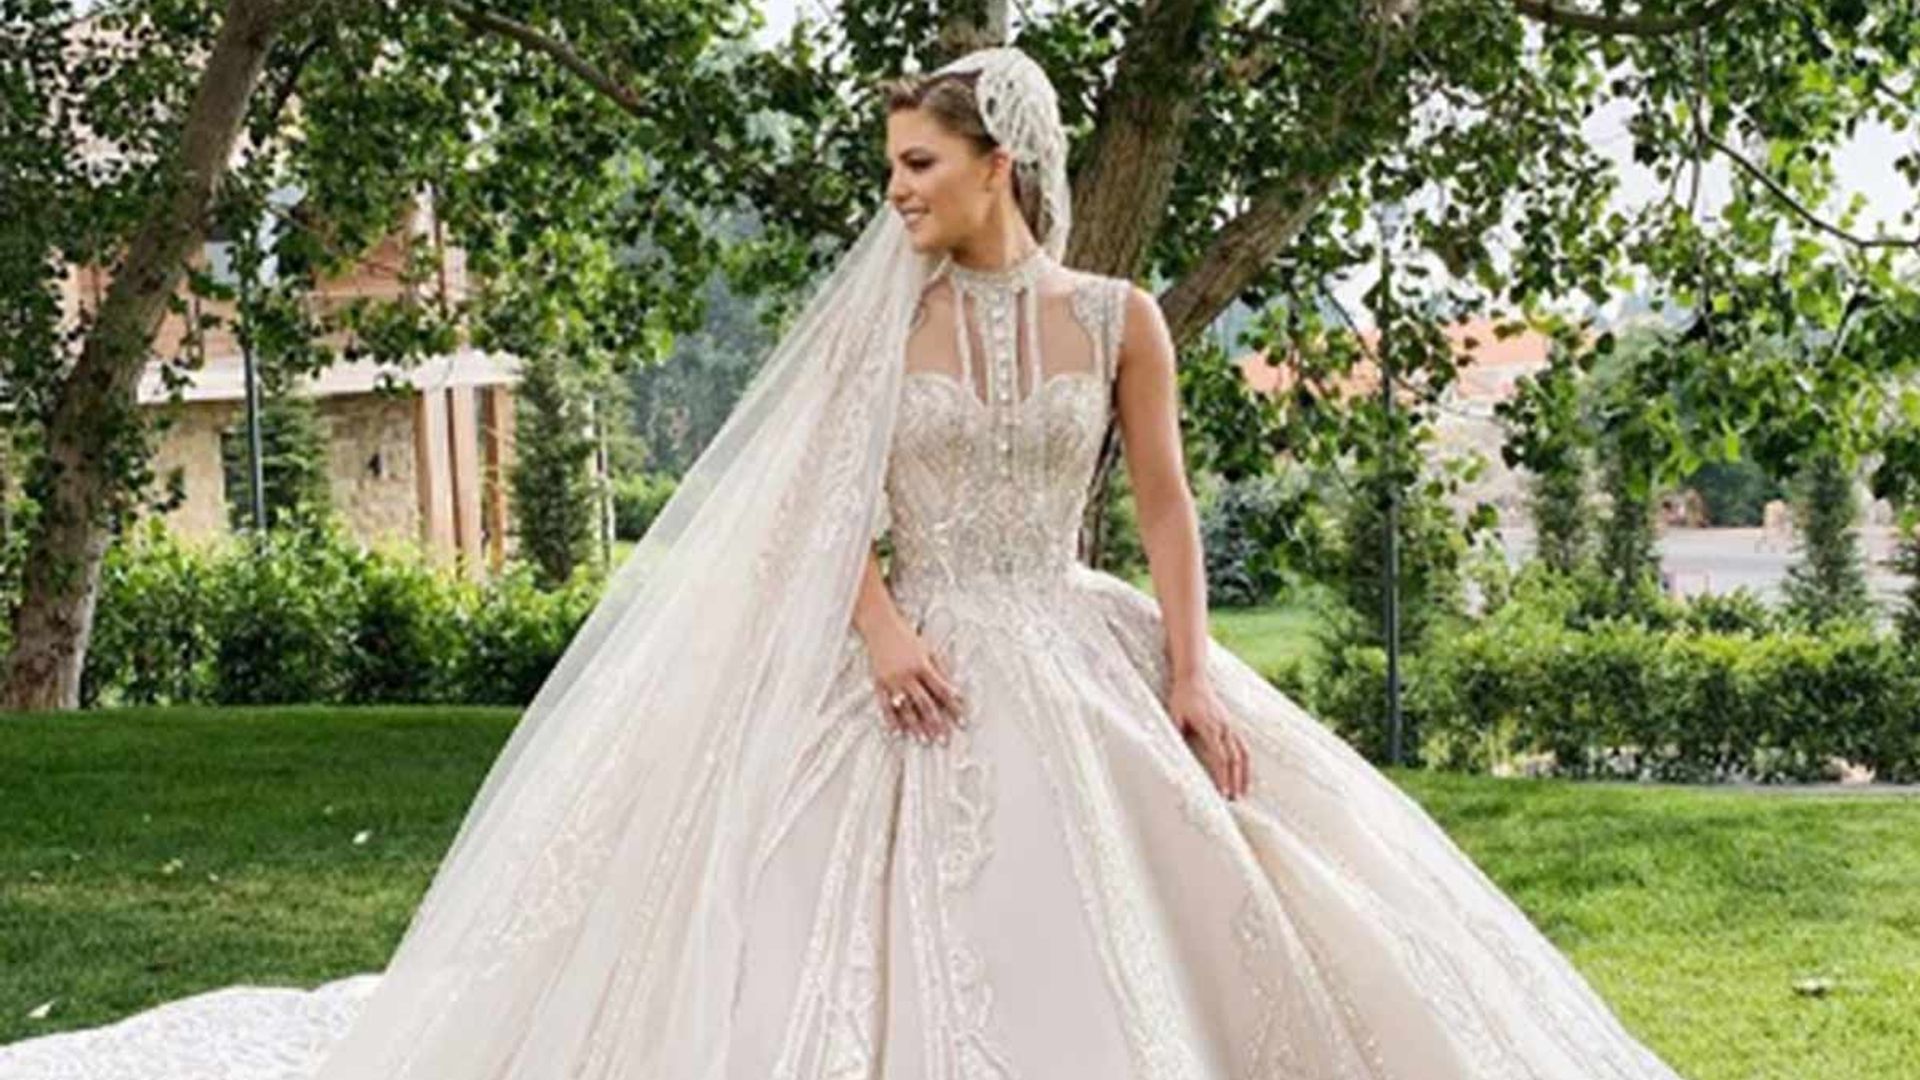 The Elie Saab wedding dress EVERYONE is talking about & what